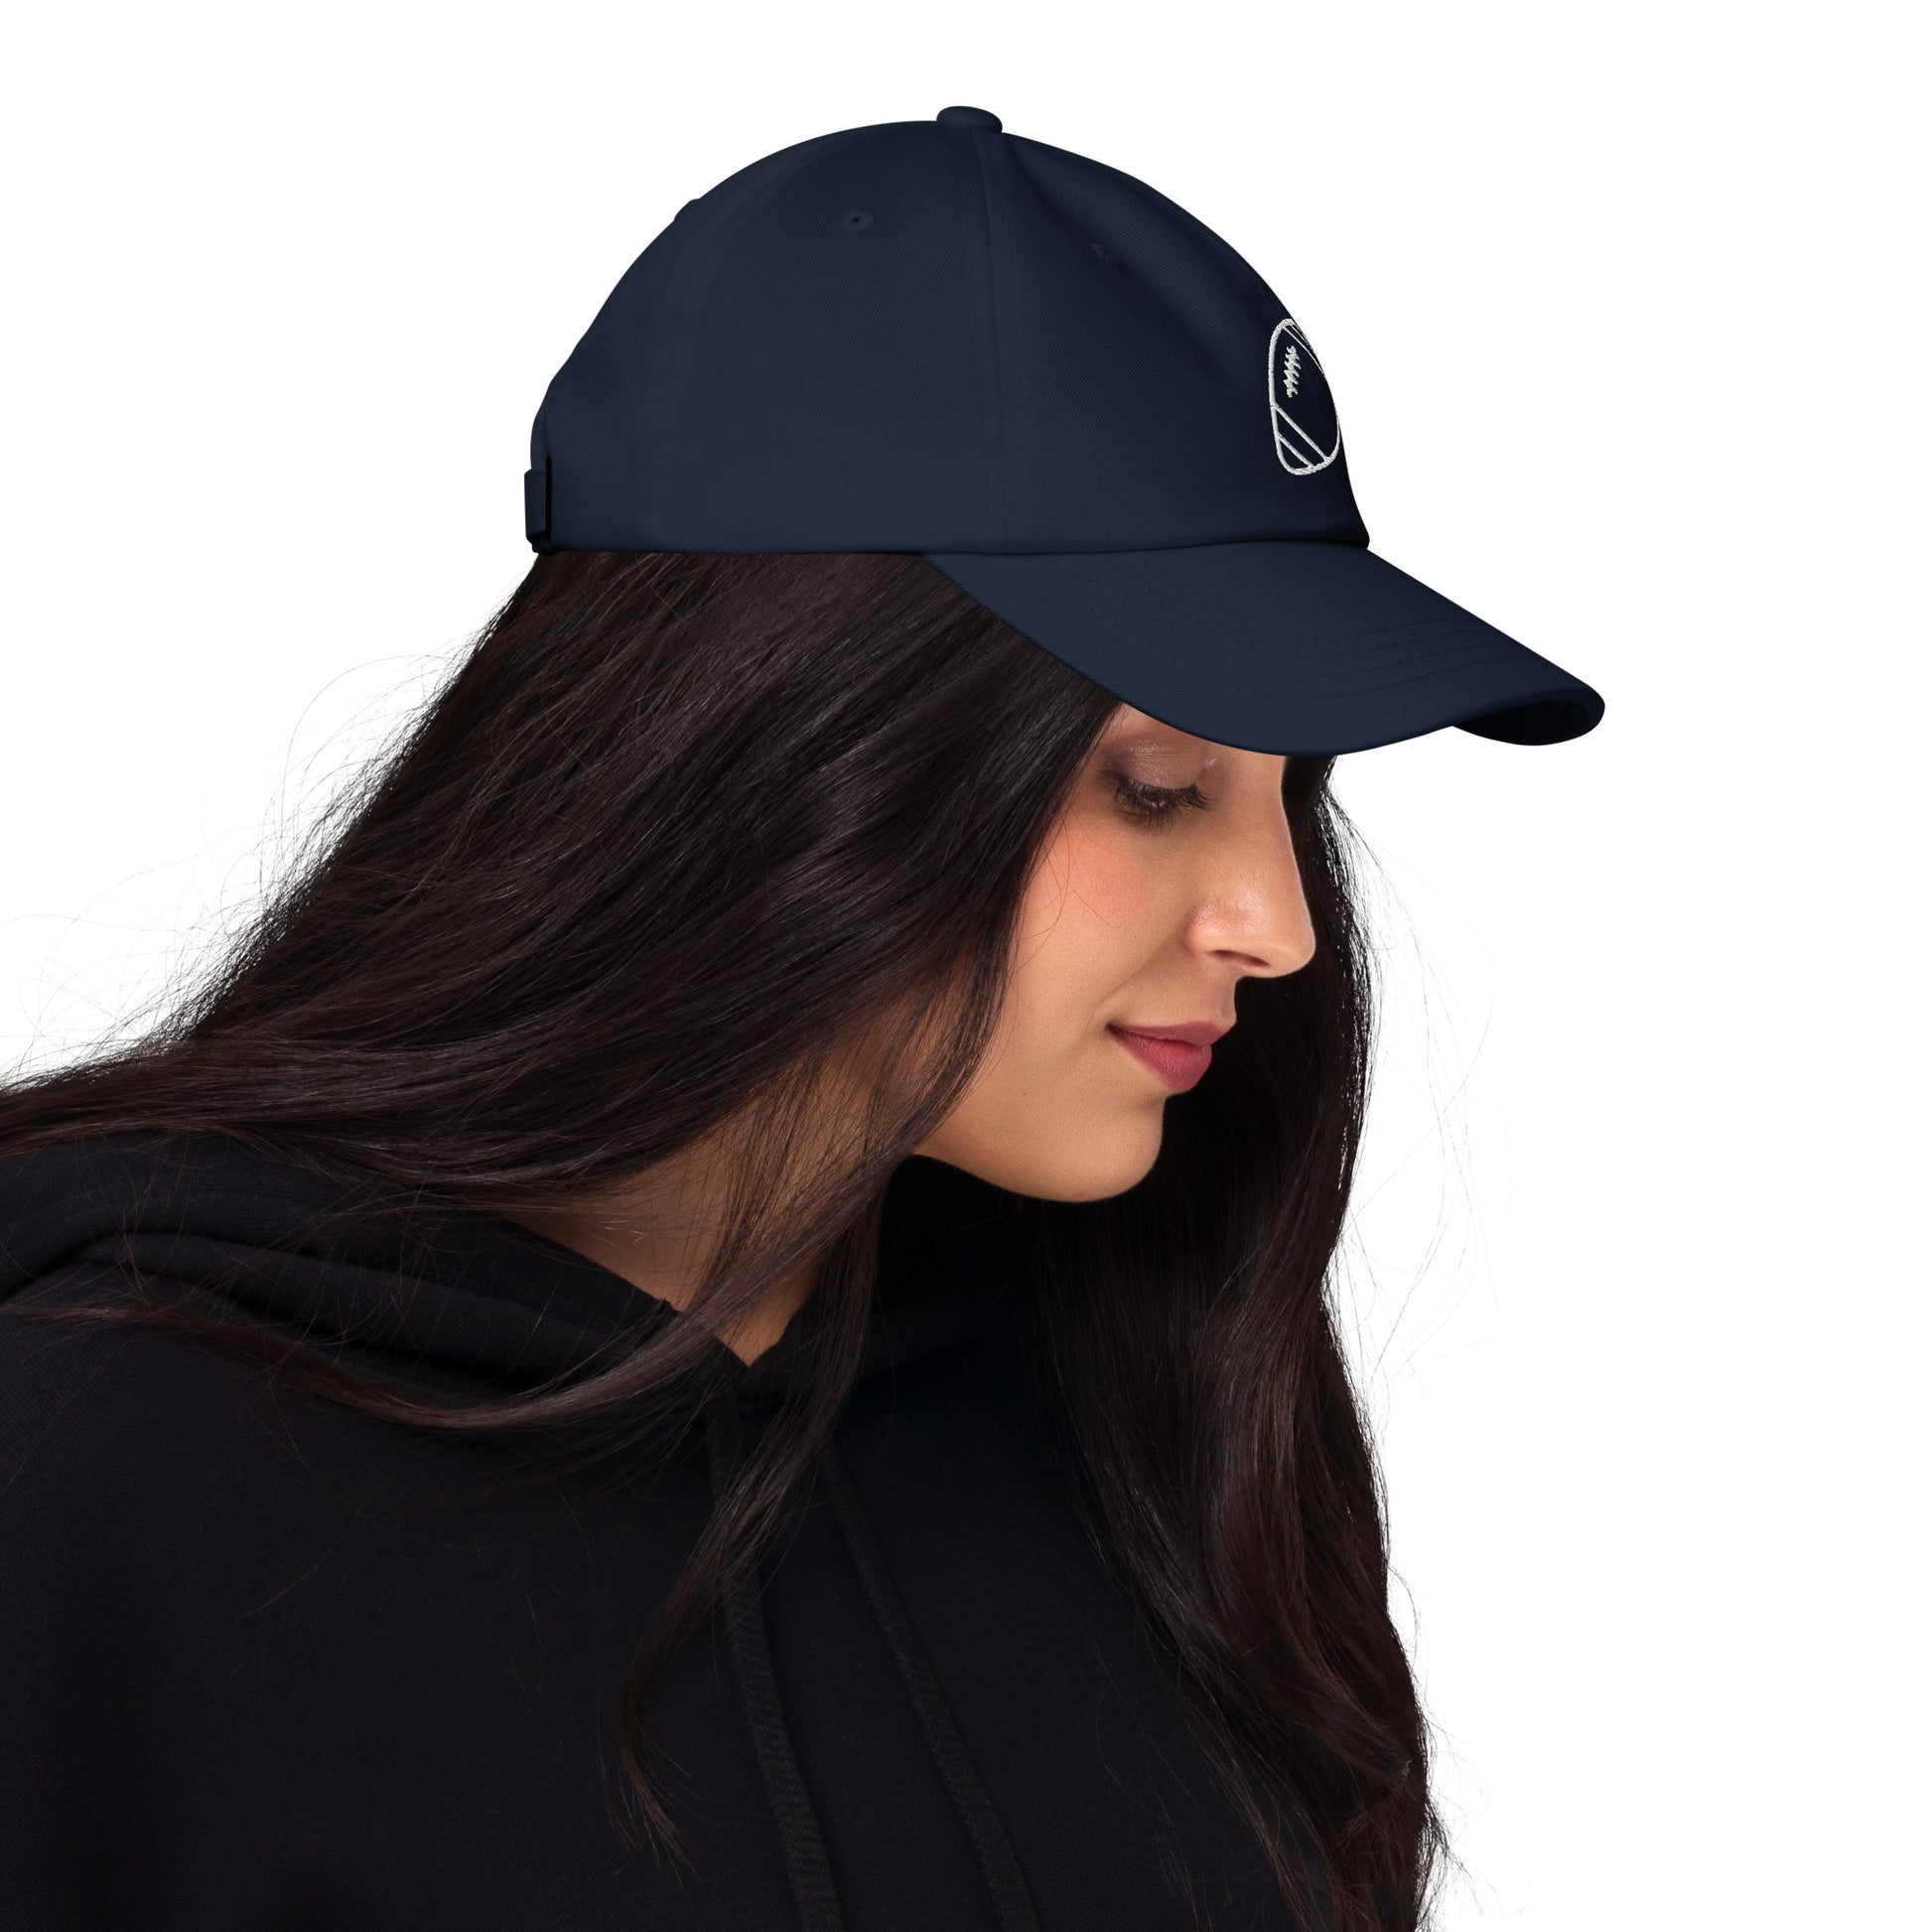 women with navy baseball cap with football